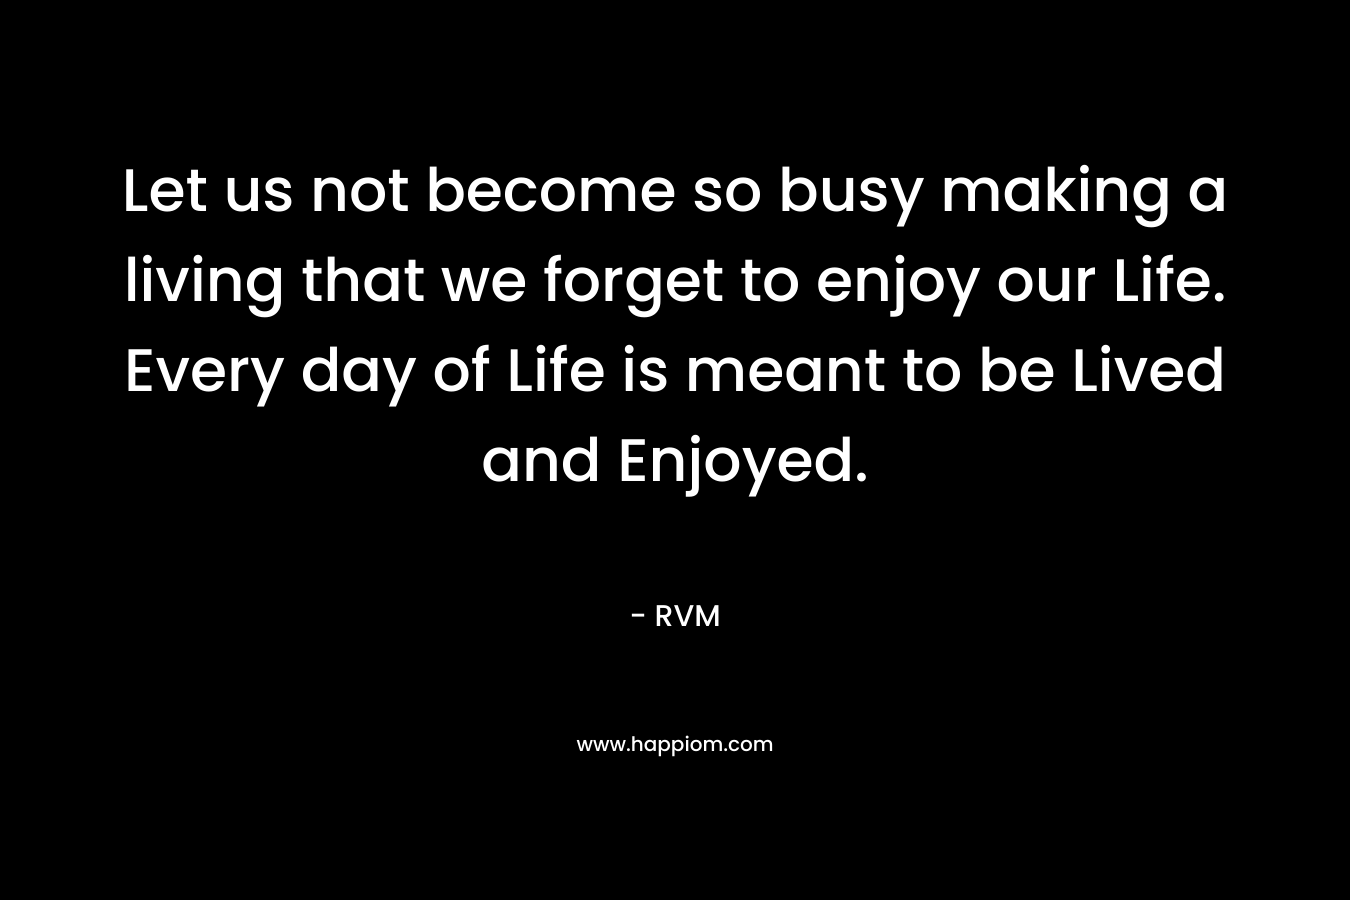 Let us not become so busy making a living that we forget to enjoy our Life. Every day of Life is meant to be Lived and Enjoyed.